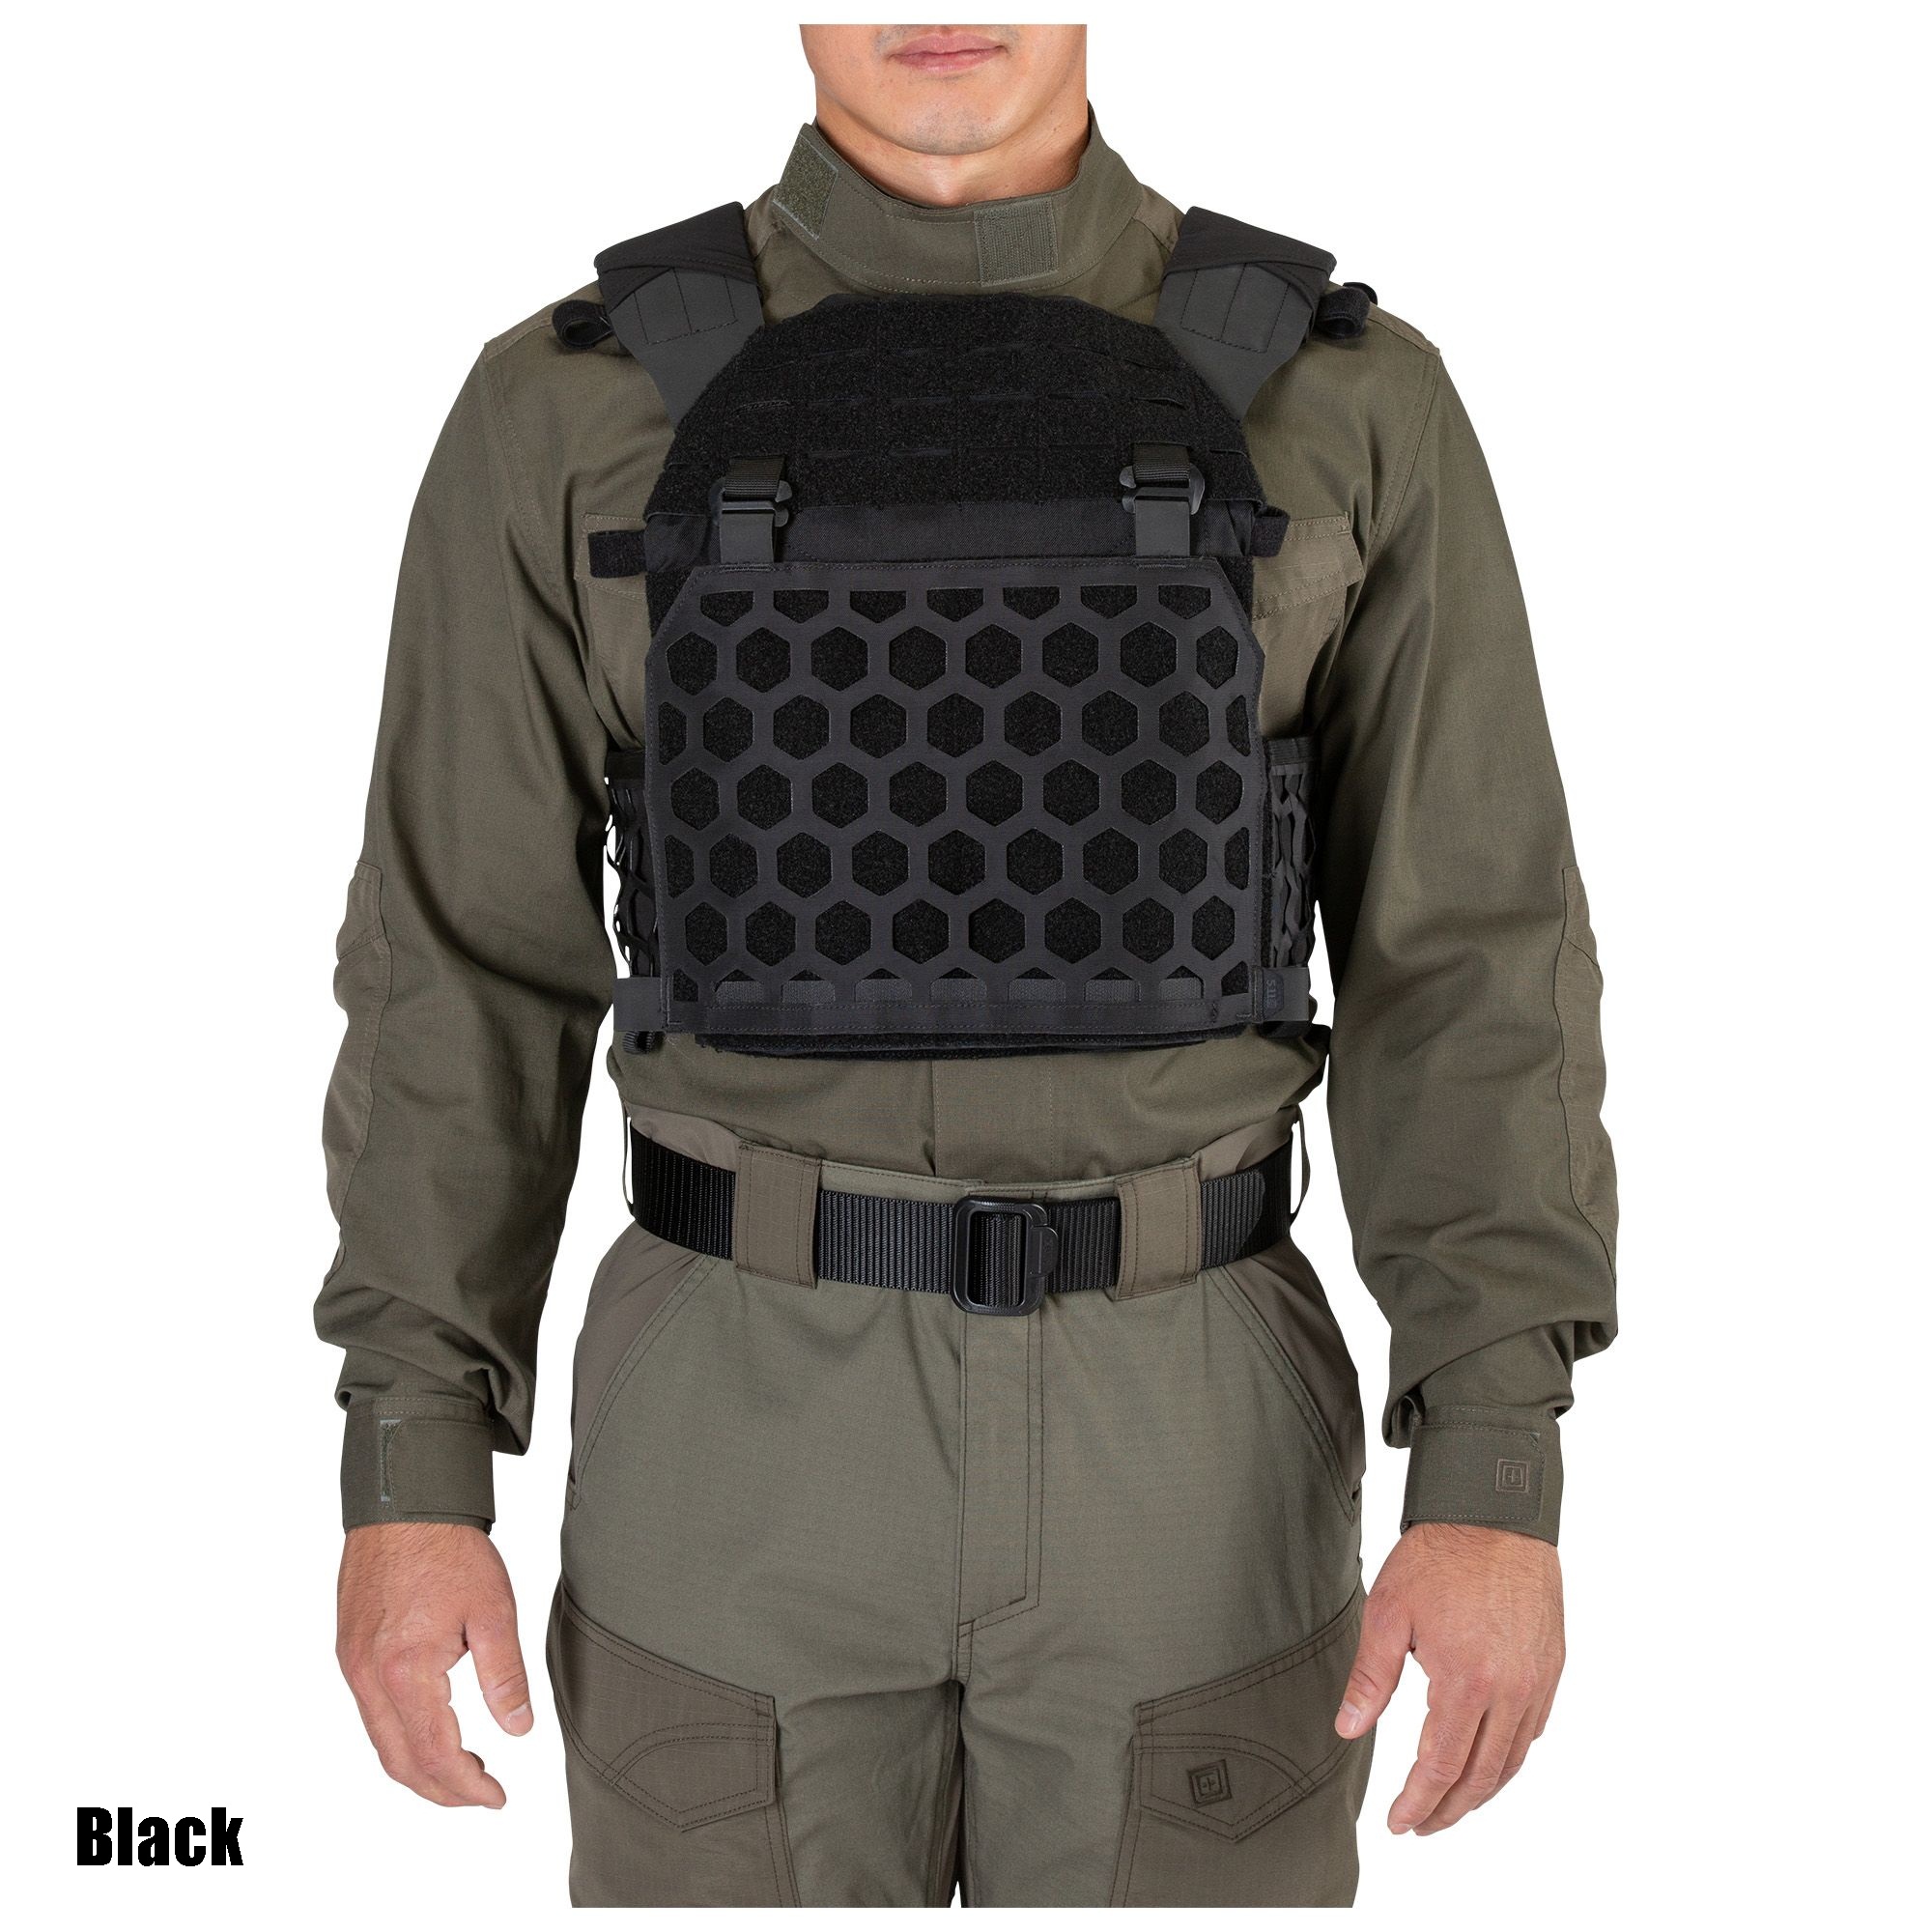 5.11 All Mission Plate Carrier